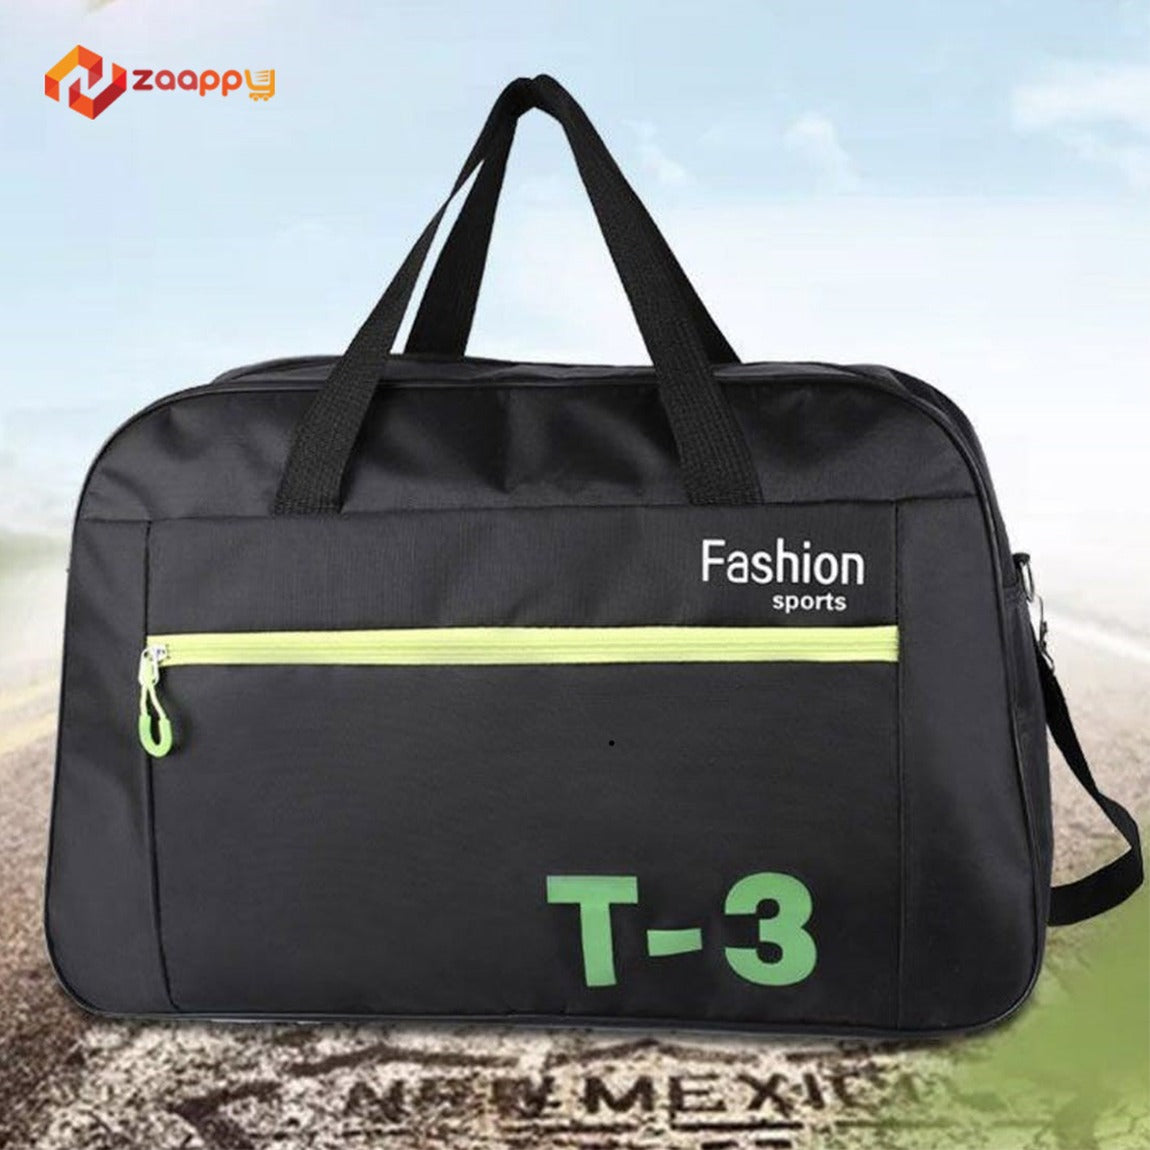 Stylish Black T-3 Sports And Athletic Gear Bag For Men